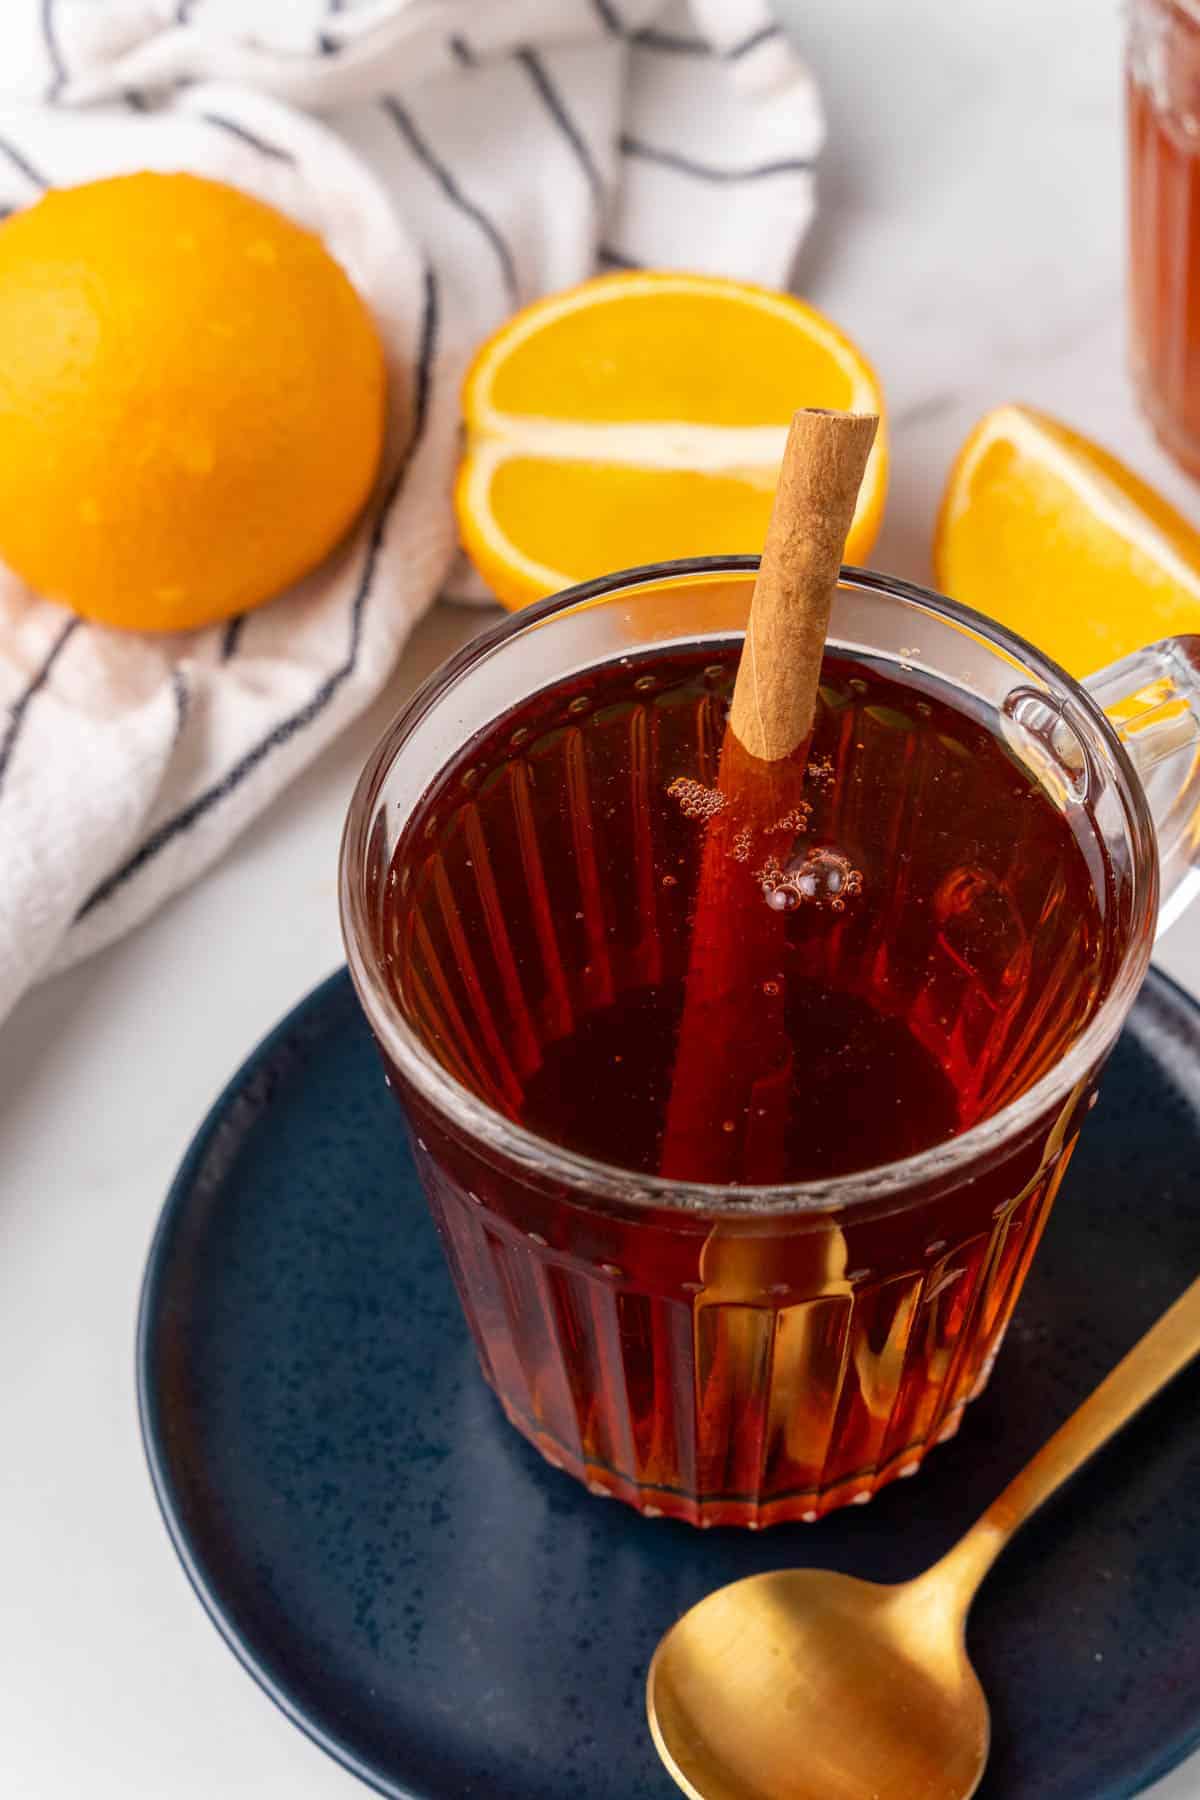 Orange cinnamon breakfast tea in a glass mug with a cinnamon stick on a navy plate with a golden spoon, oranges in the background